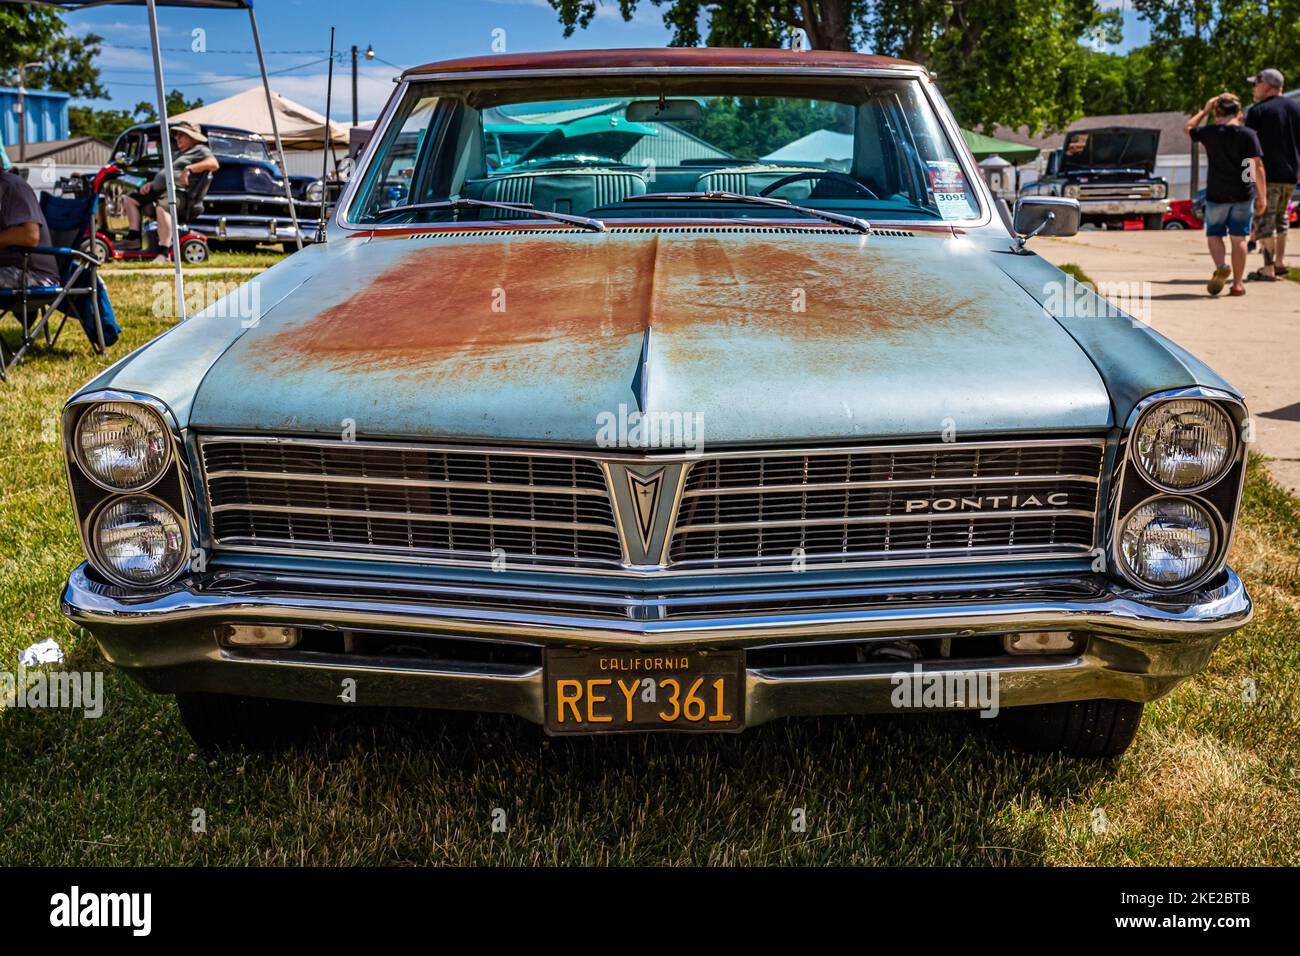 Des Moines, IA - July 02, 2022: High perspective front view of a 1965 Pontiac Tempest 2 Door Hardtop at a local car show. Stock Photo